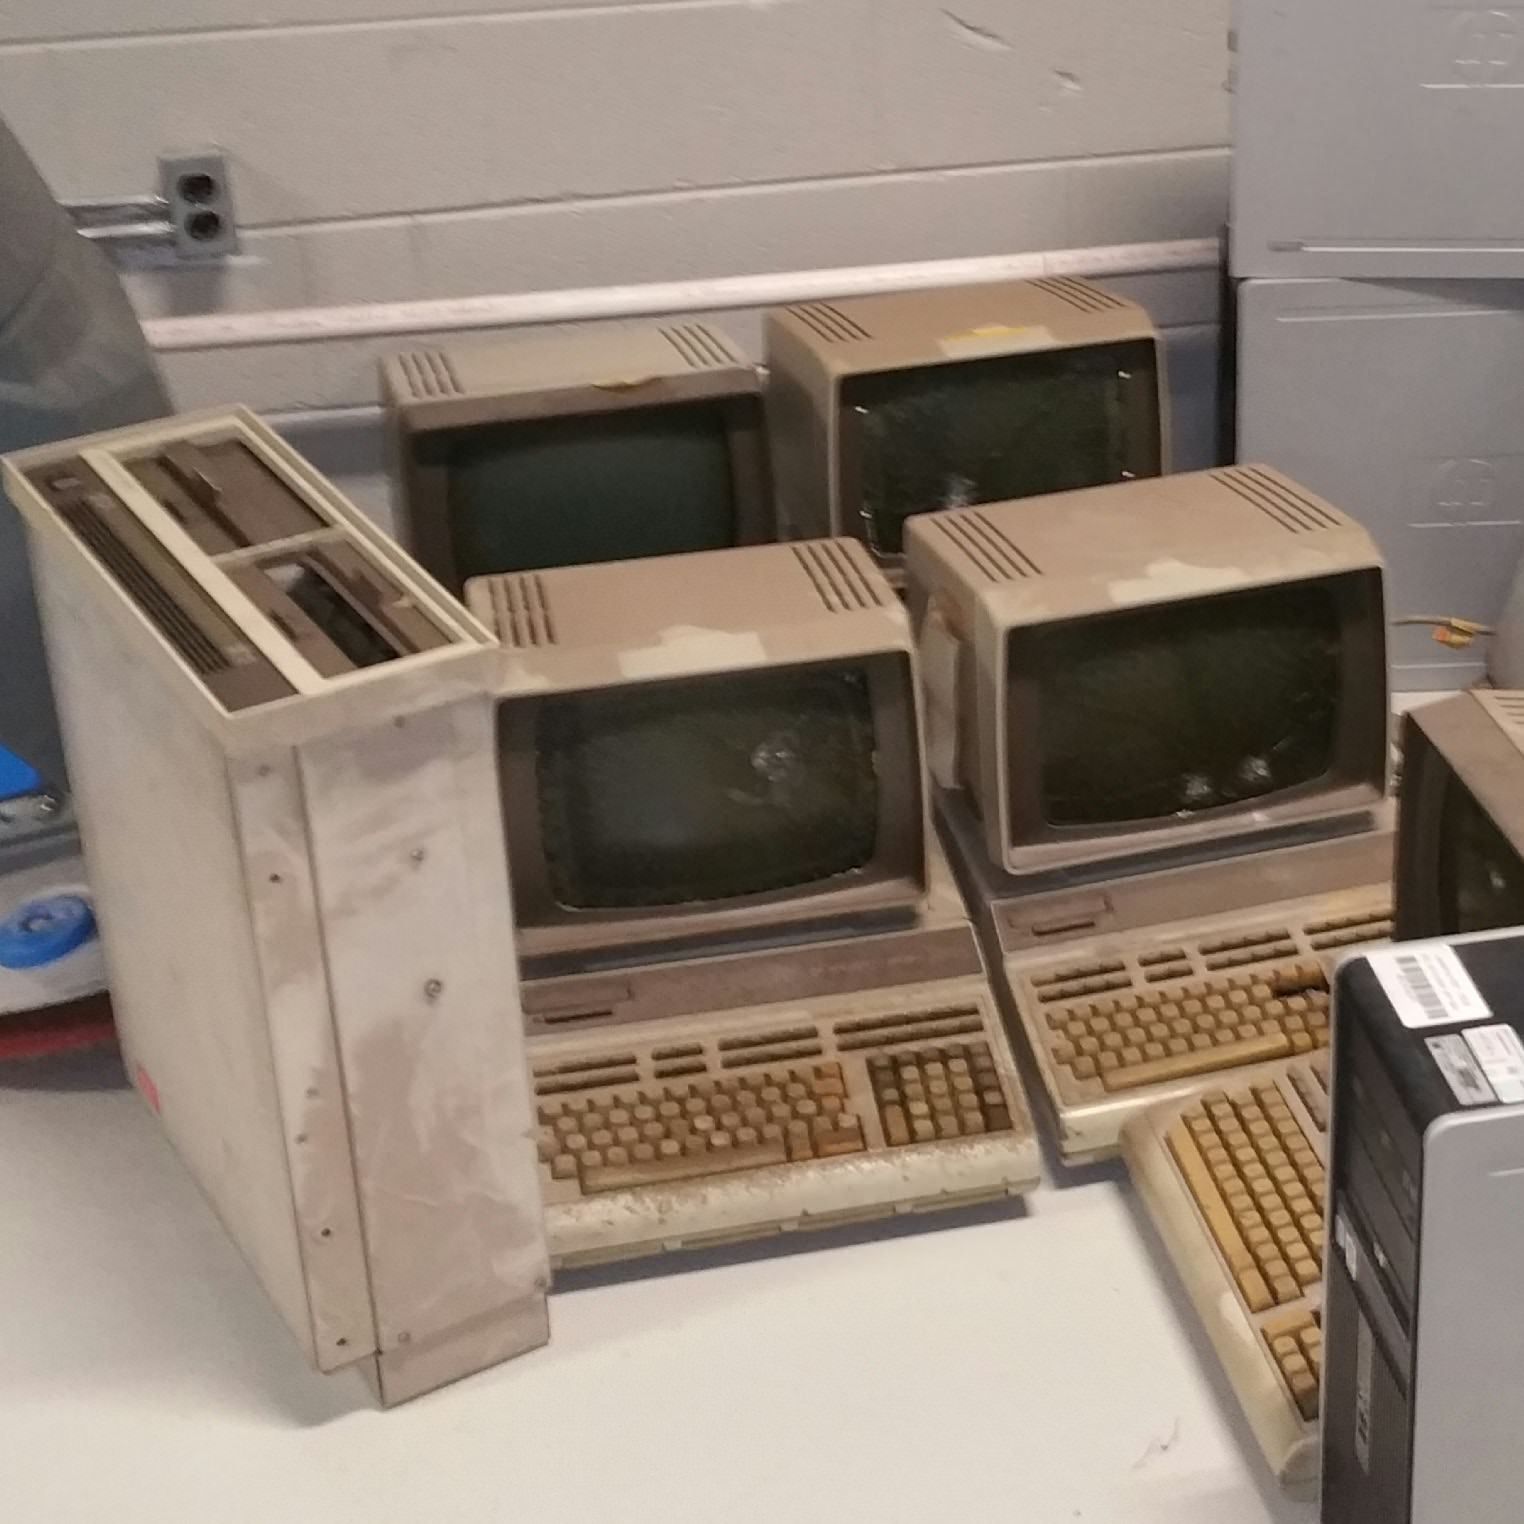 Today the company I work for decided to get rid of our old computers.